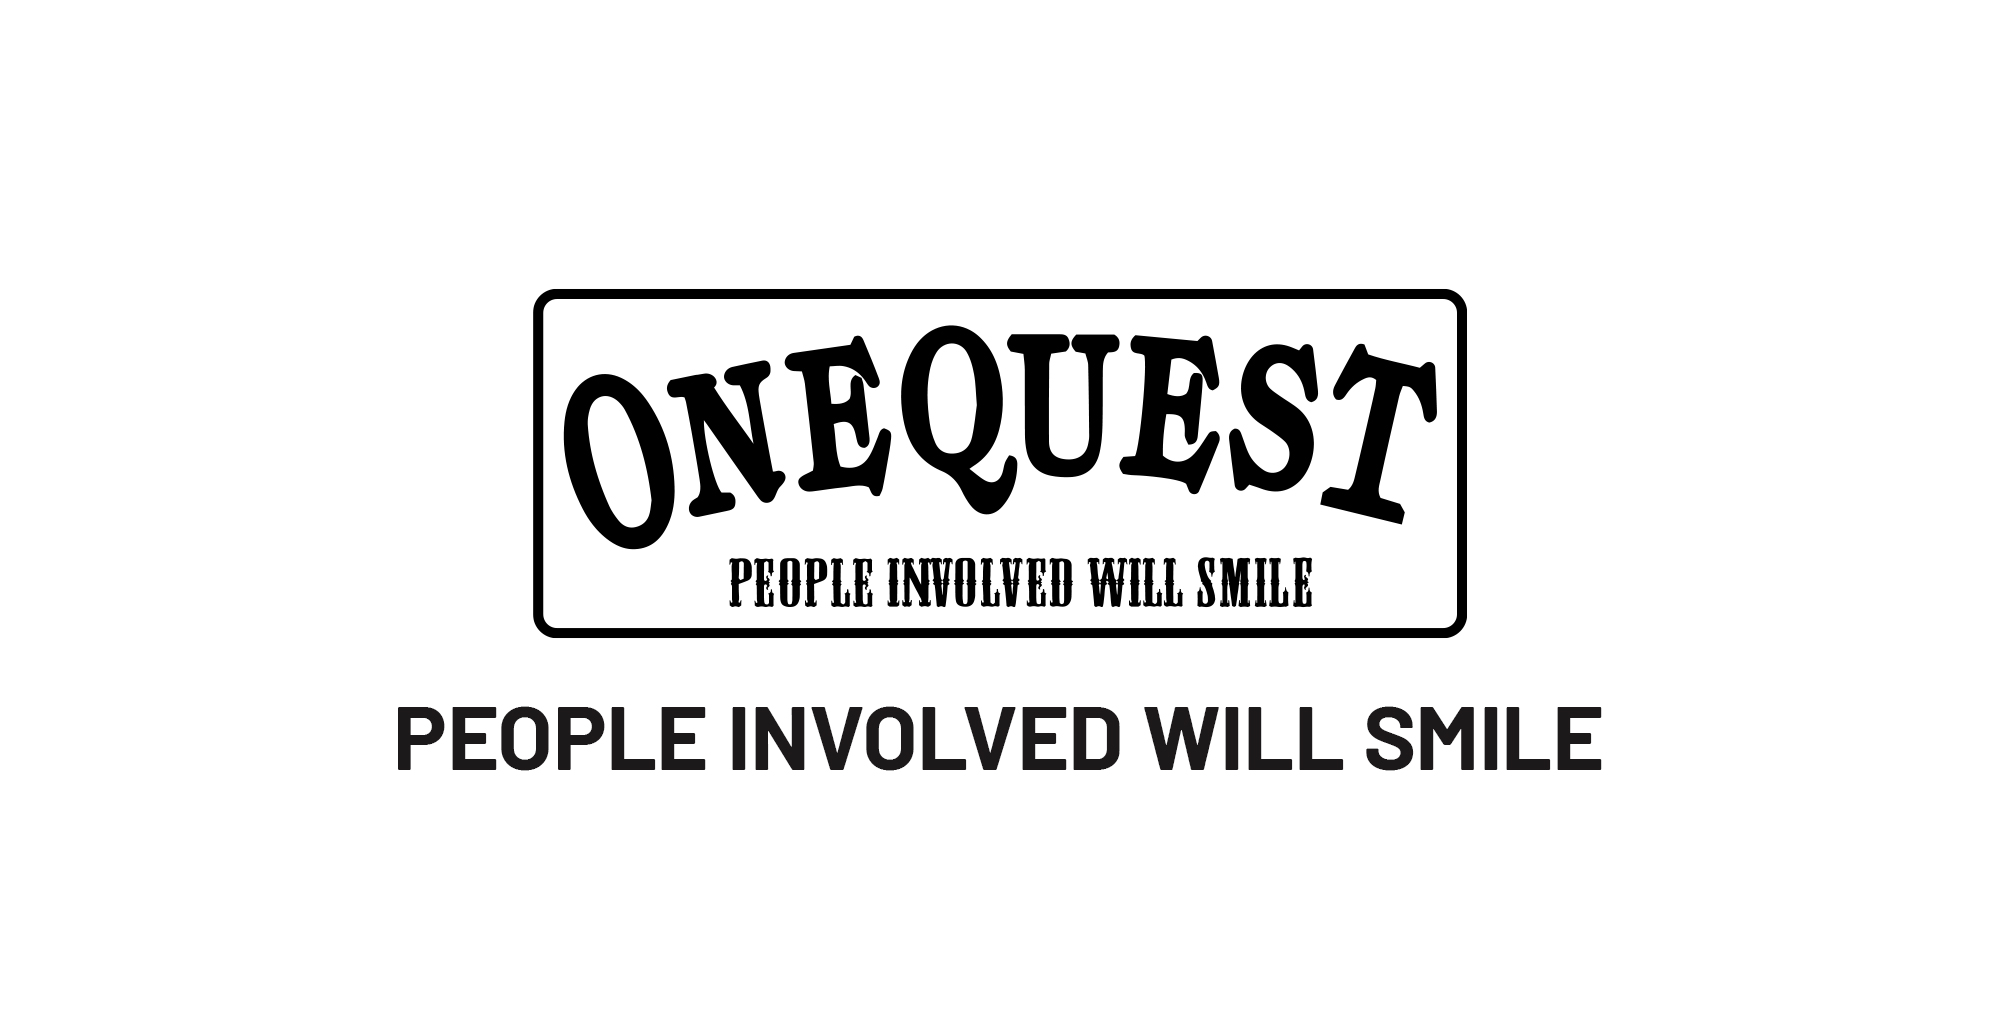 ONEQUEST PEOPLE INVOLVED WILL SMILE　関わる人たちが笑顔になるように